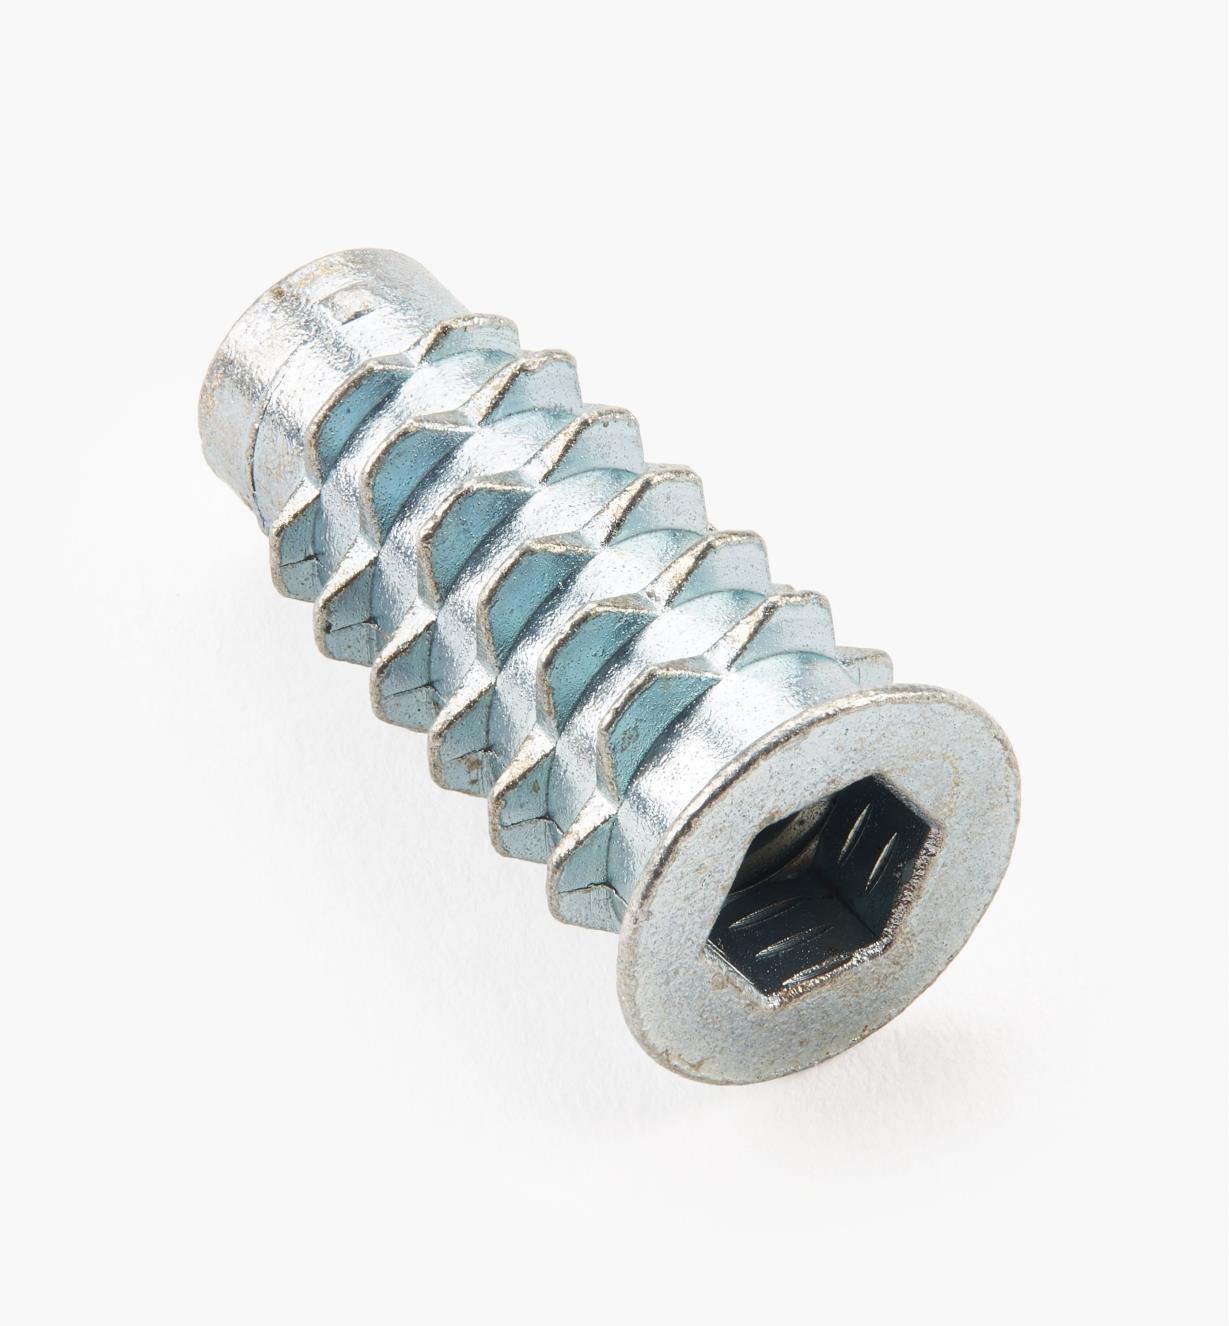 00N1025-25mm-flanged-nut-1-4-20-quick-connect-f-02.jpg